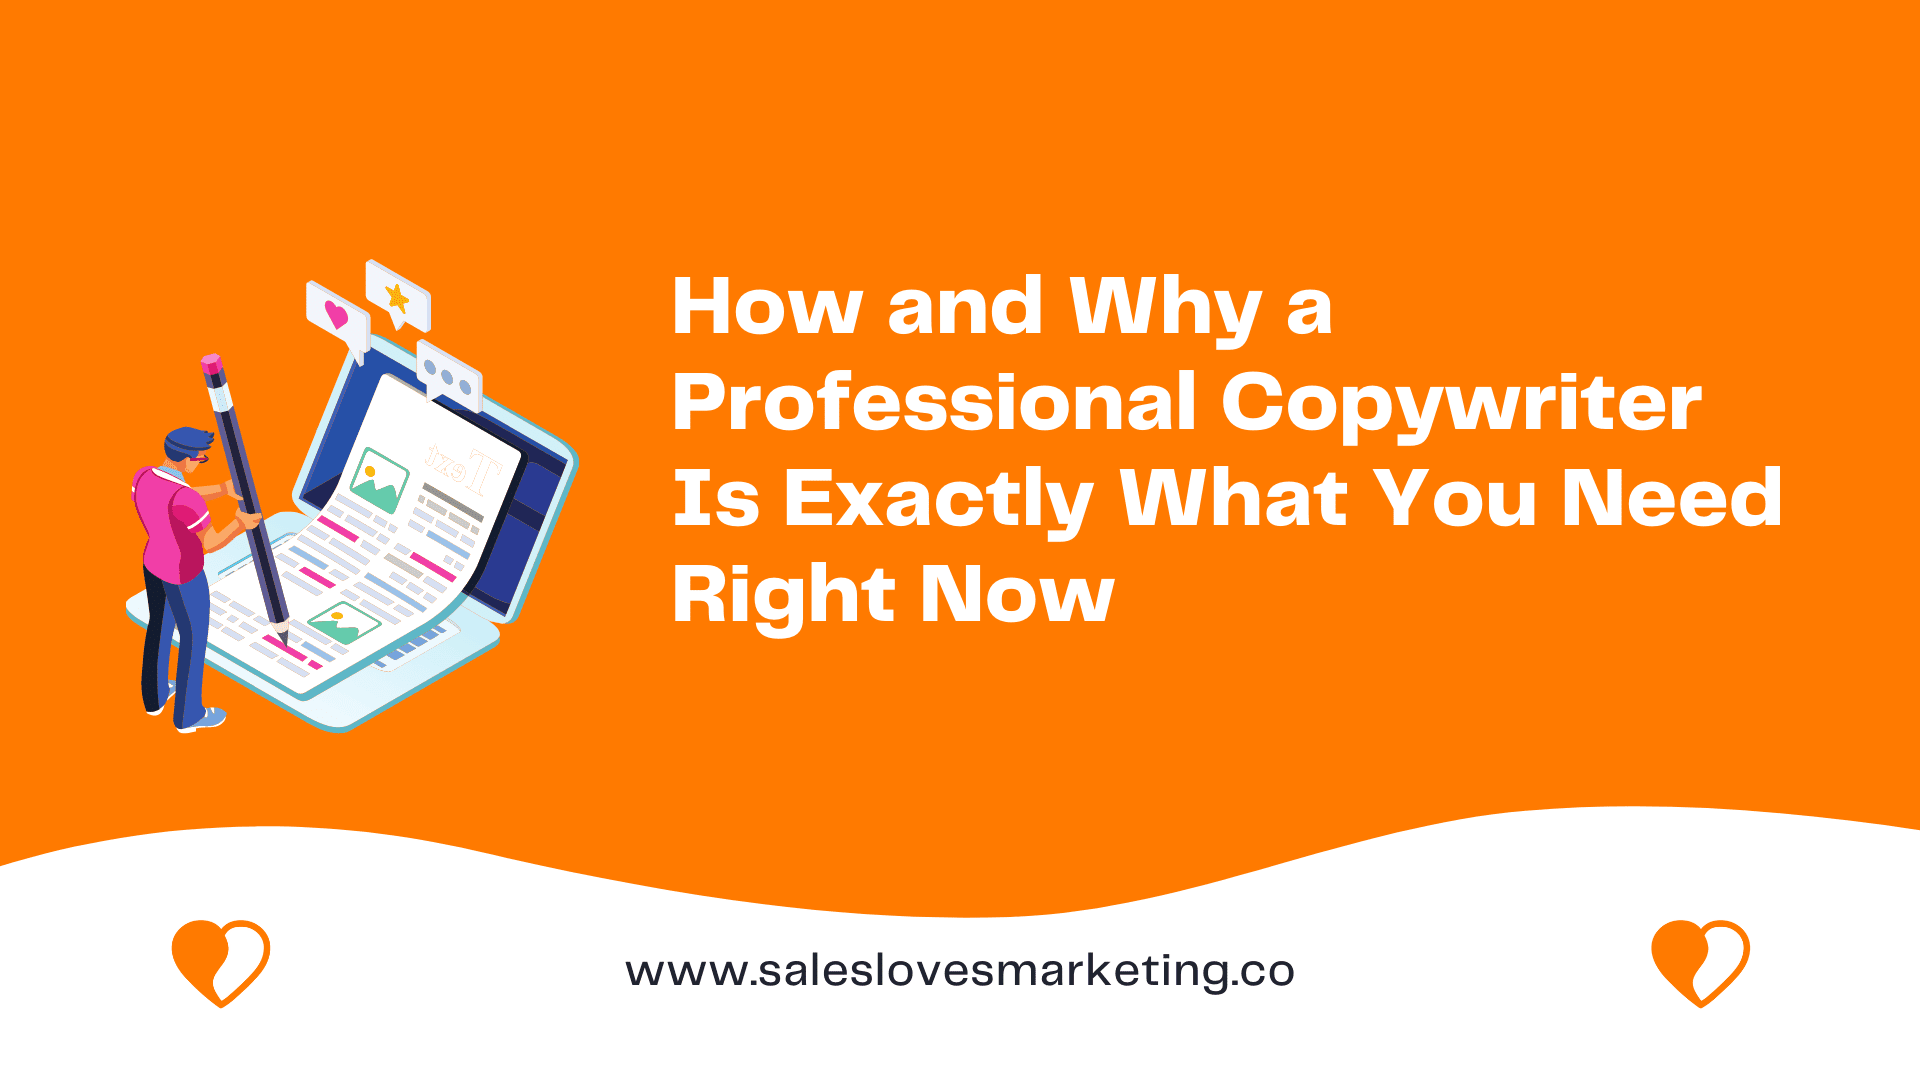 How and Why a Professional Copywriter Is Exactly What You Need Right Now